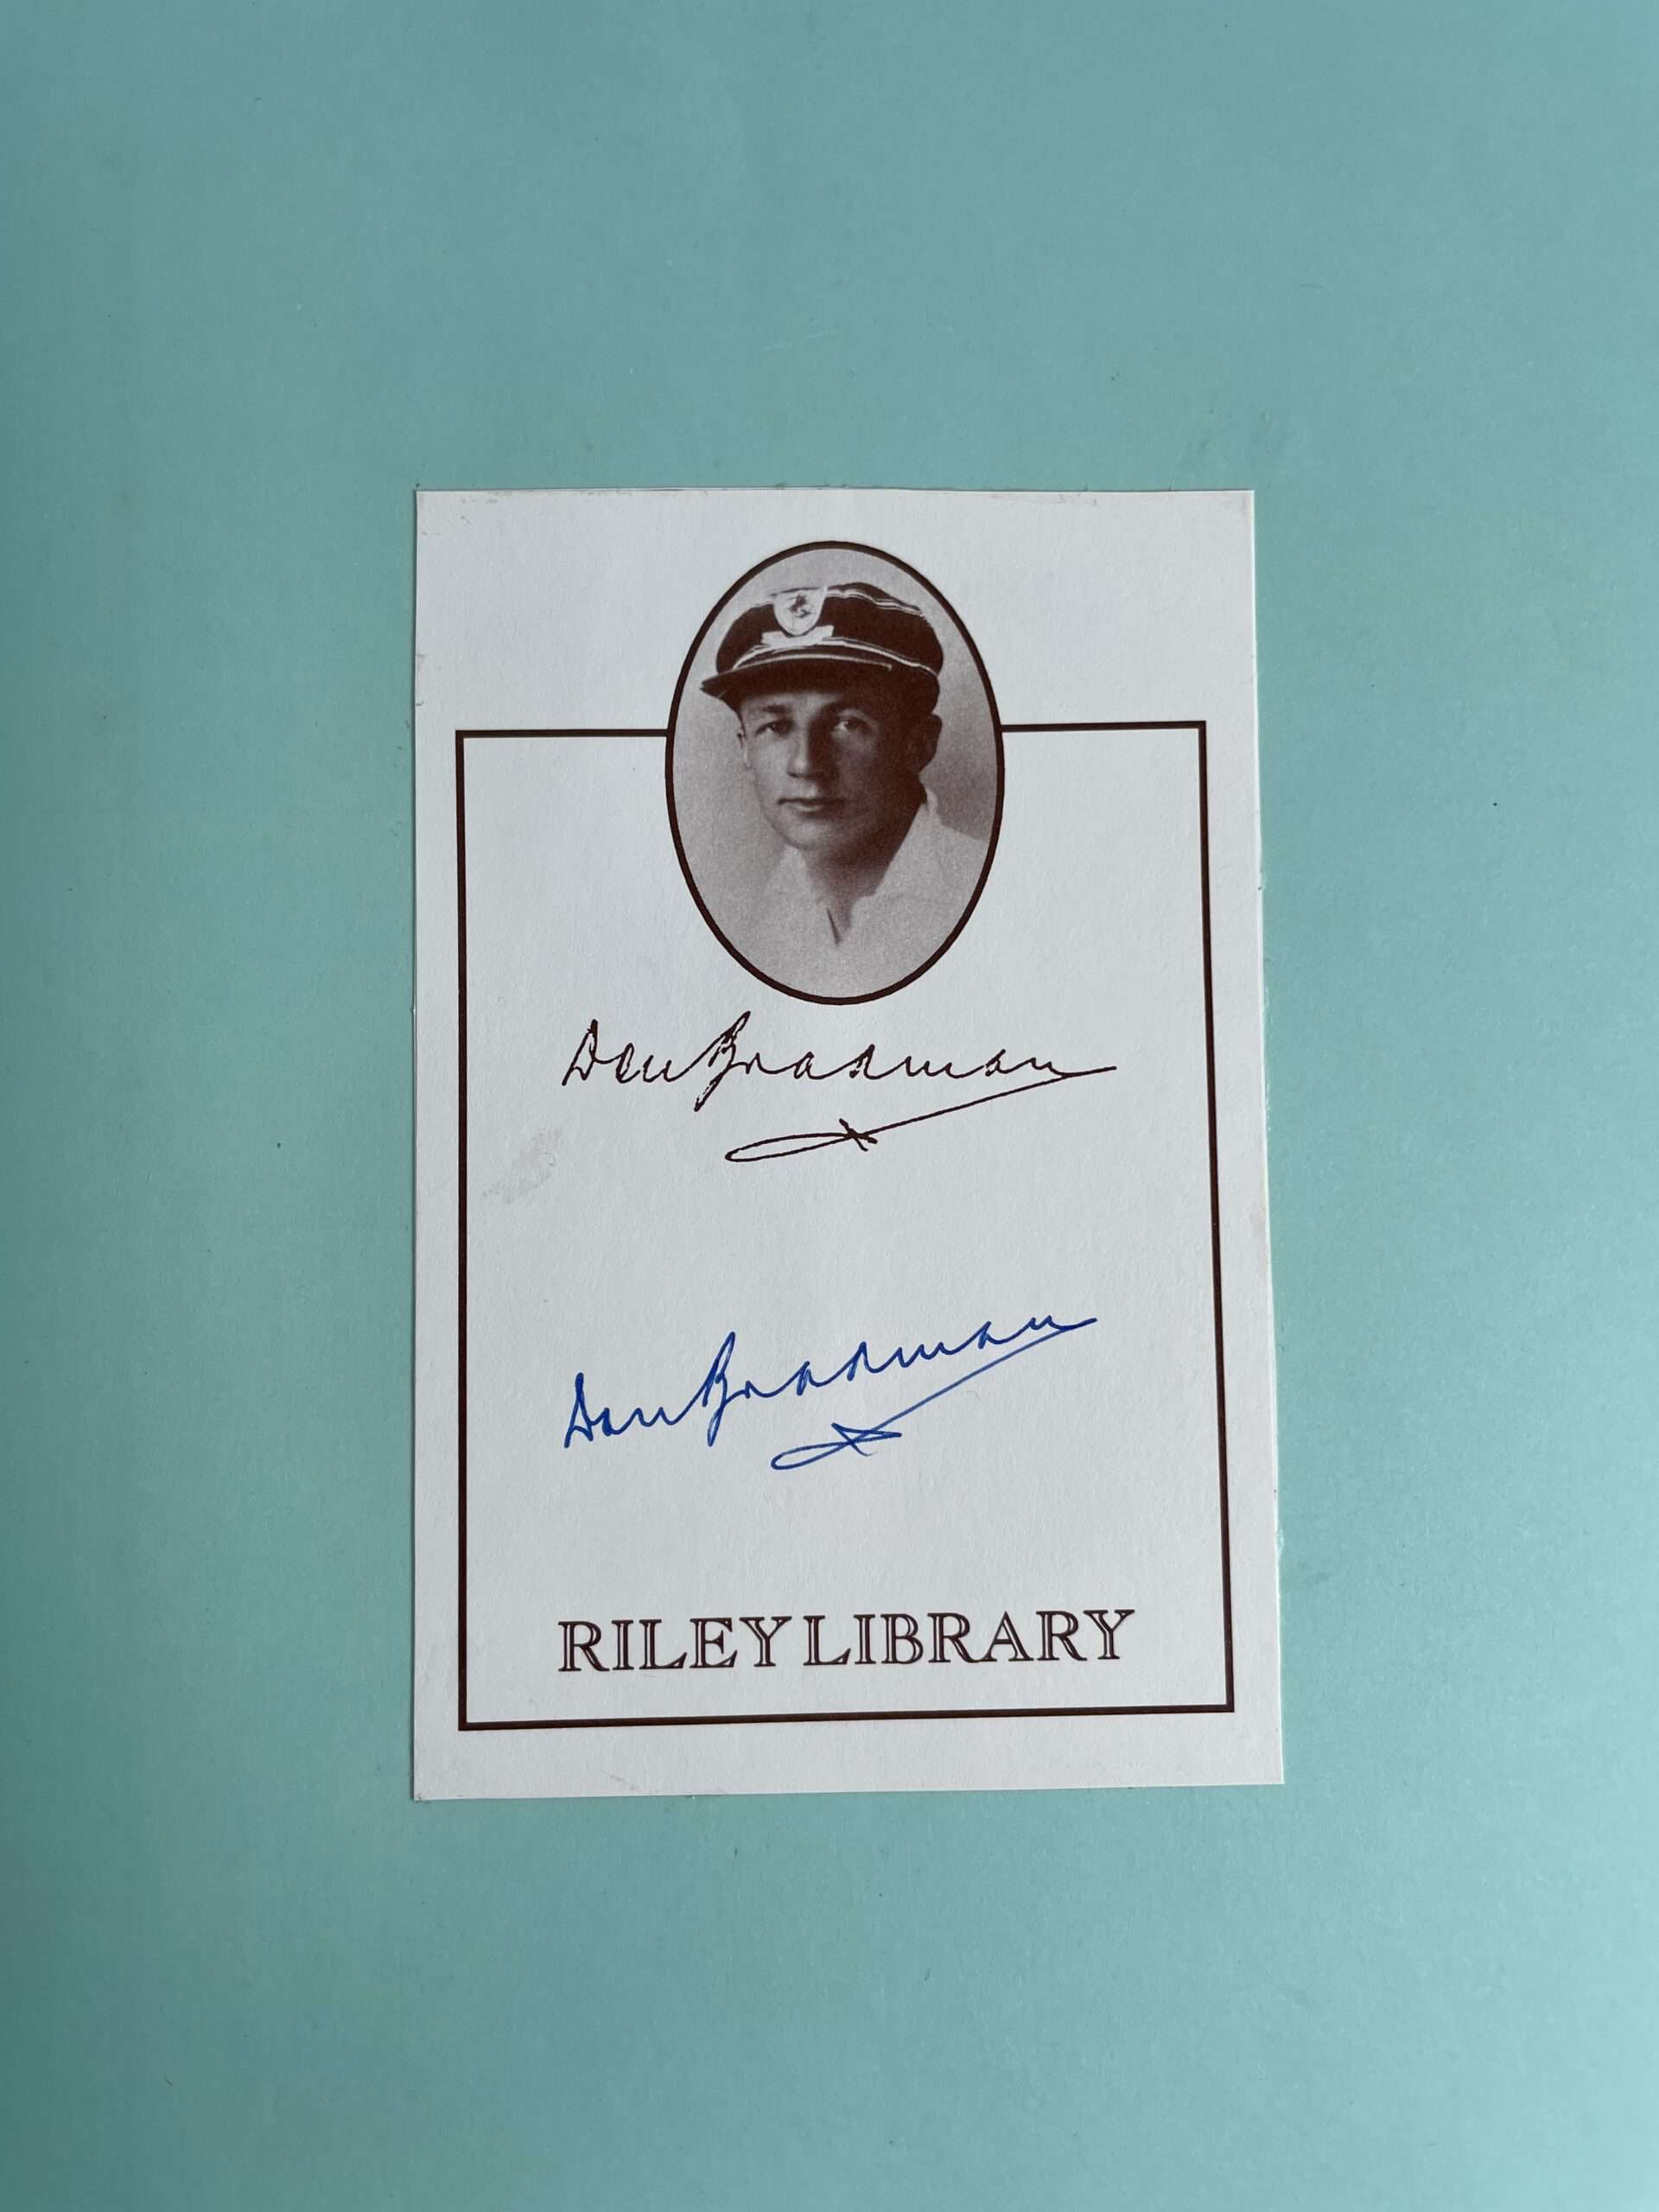 michael page bradman signed first edition2